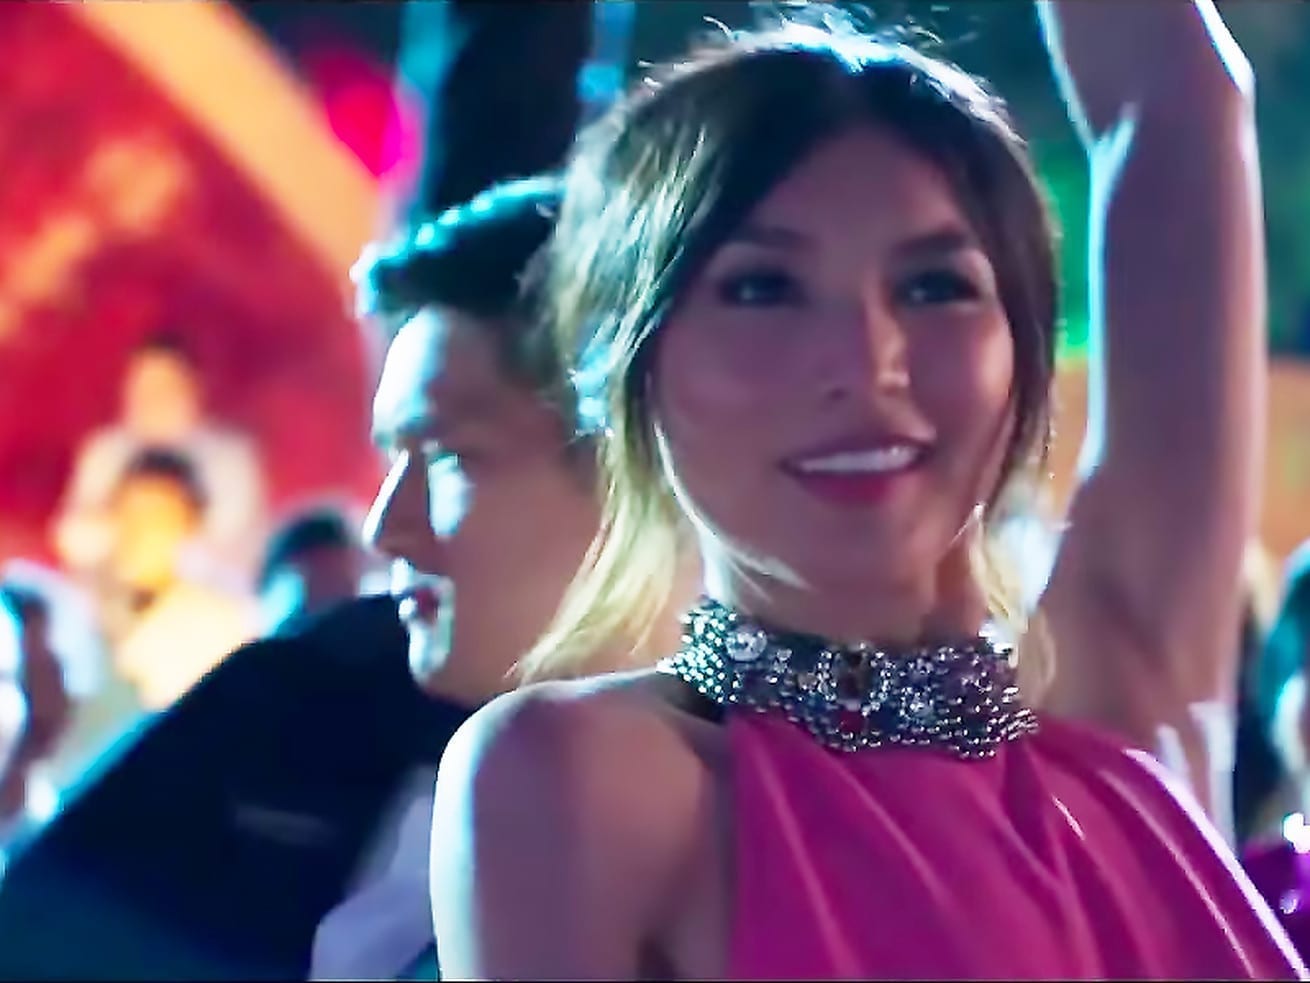 Crazy Rich Asians’ mid-credits scene is brief, but very revealing